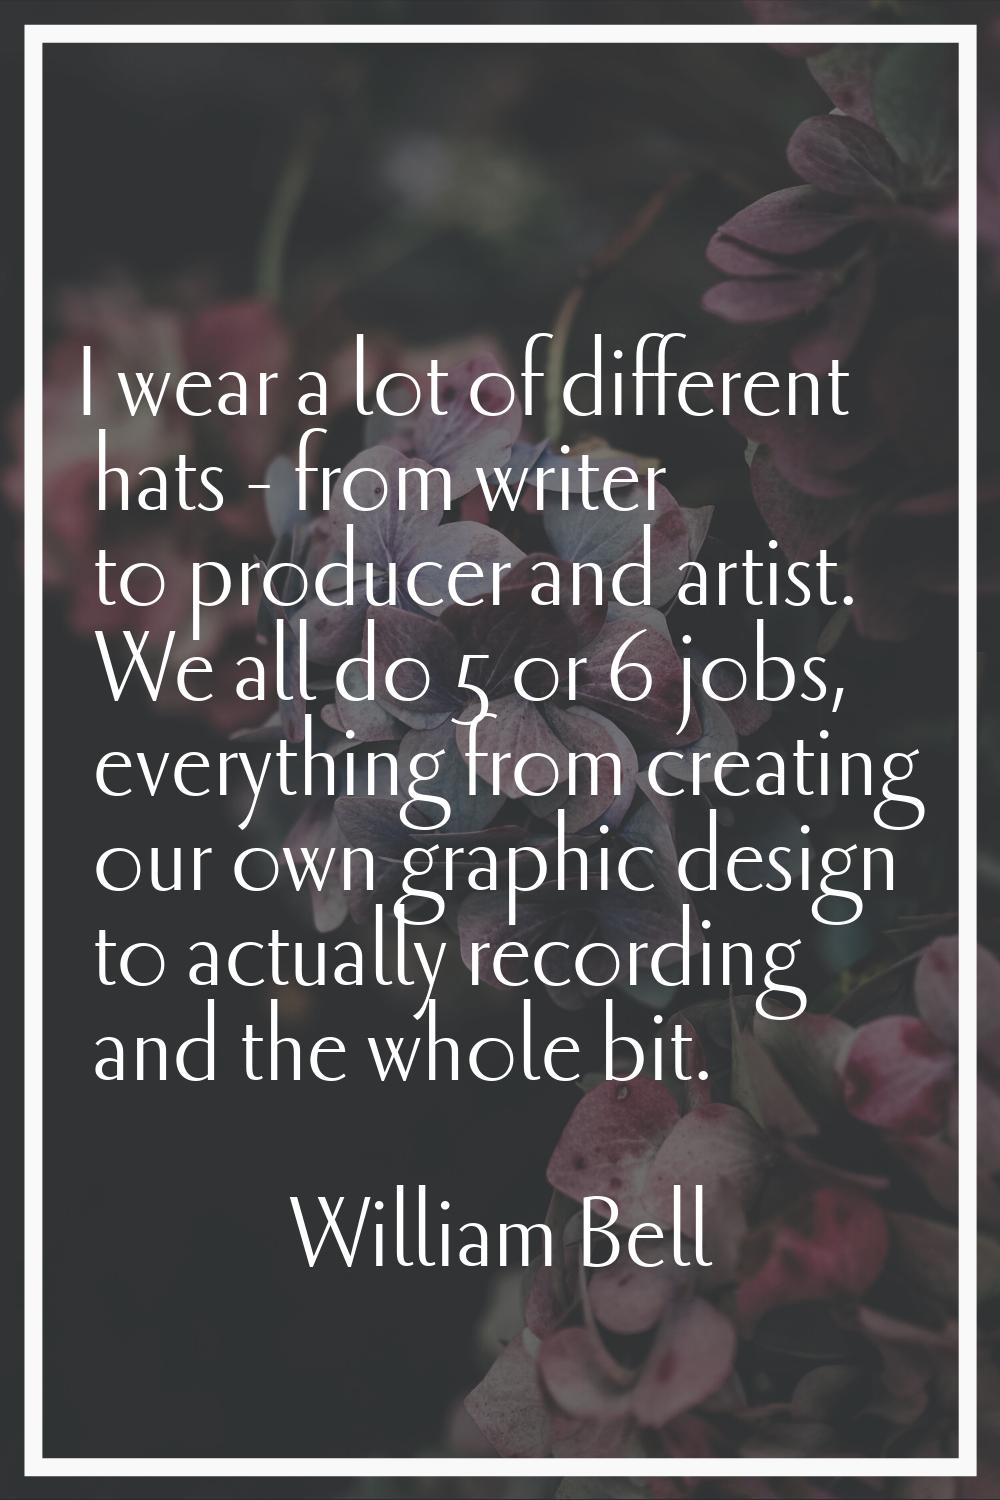 I wear a lot of different hats - from writer to producer and artist. We all do 5 or 6 jobs, everyth